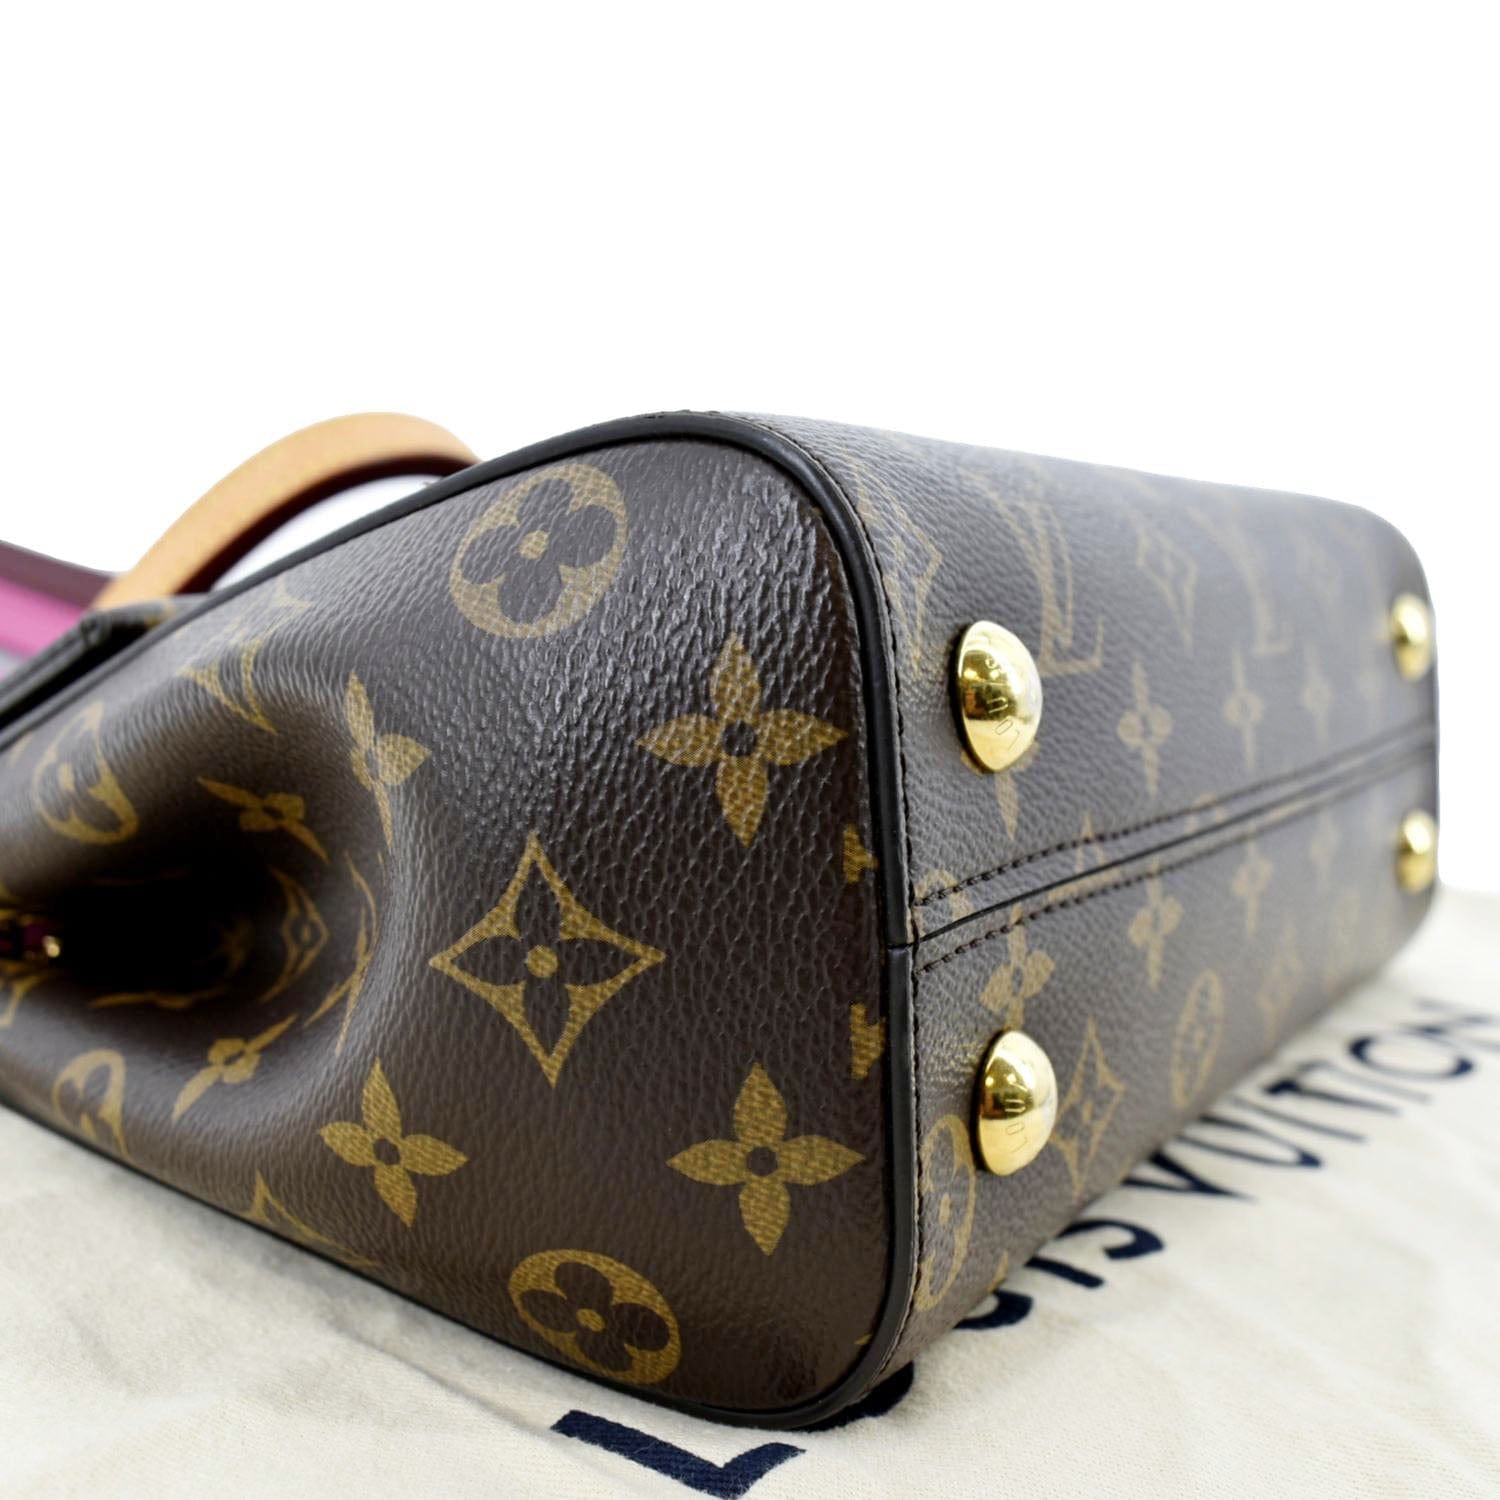 Louis Vuitton Cluny MM - Used But In Excellent Condition